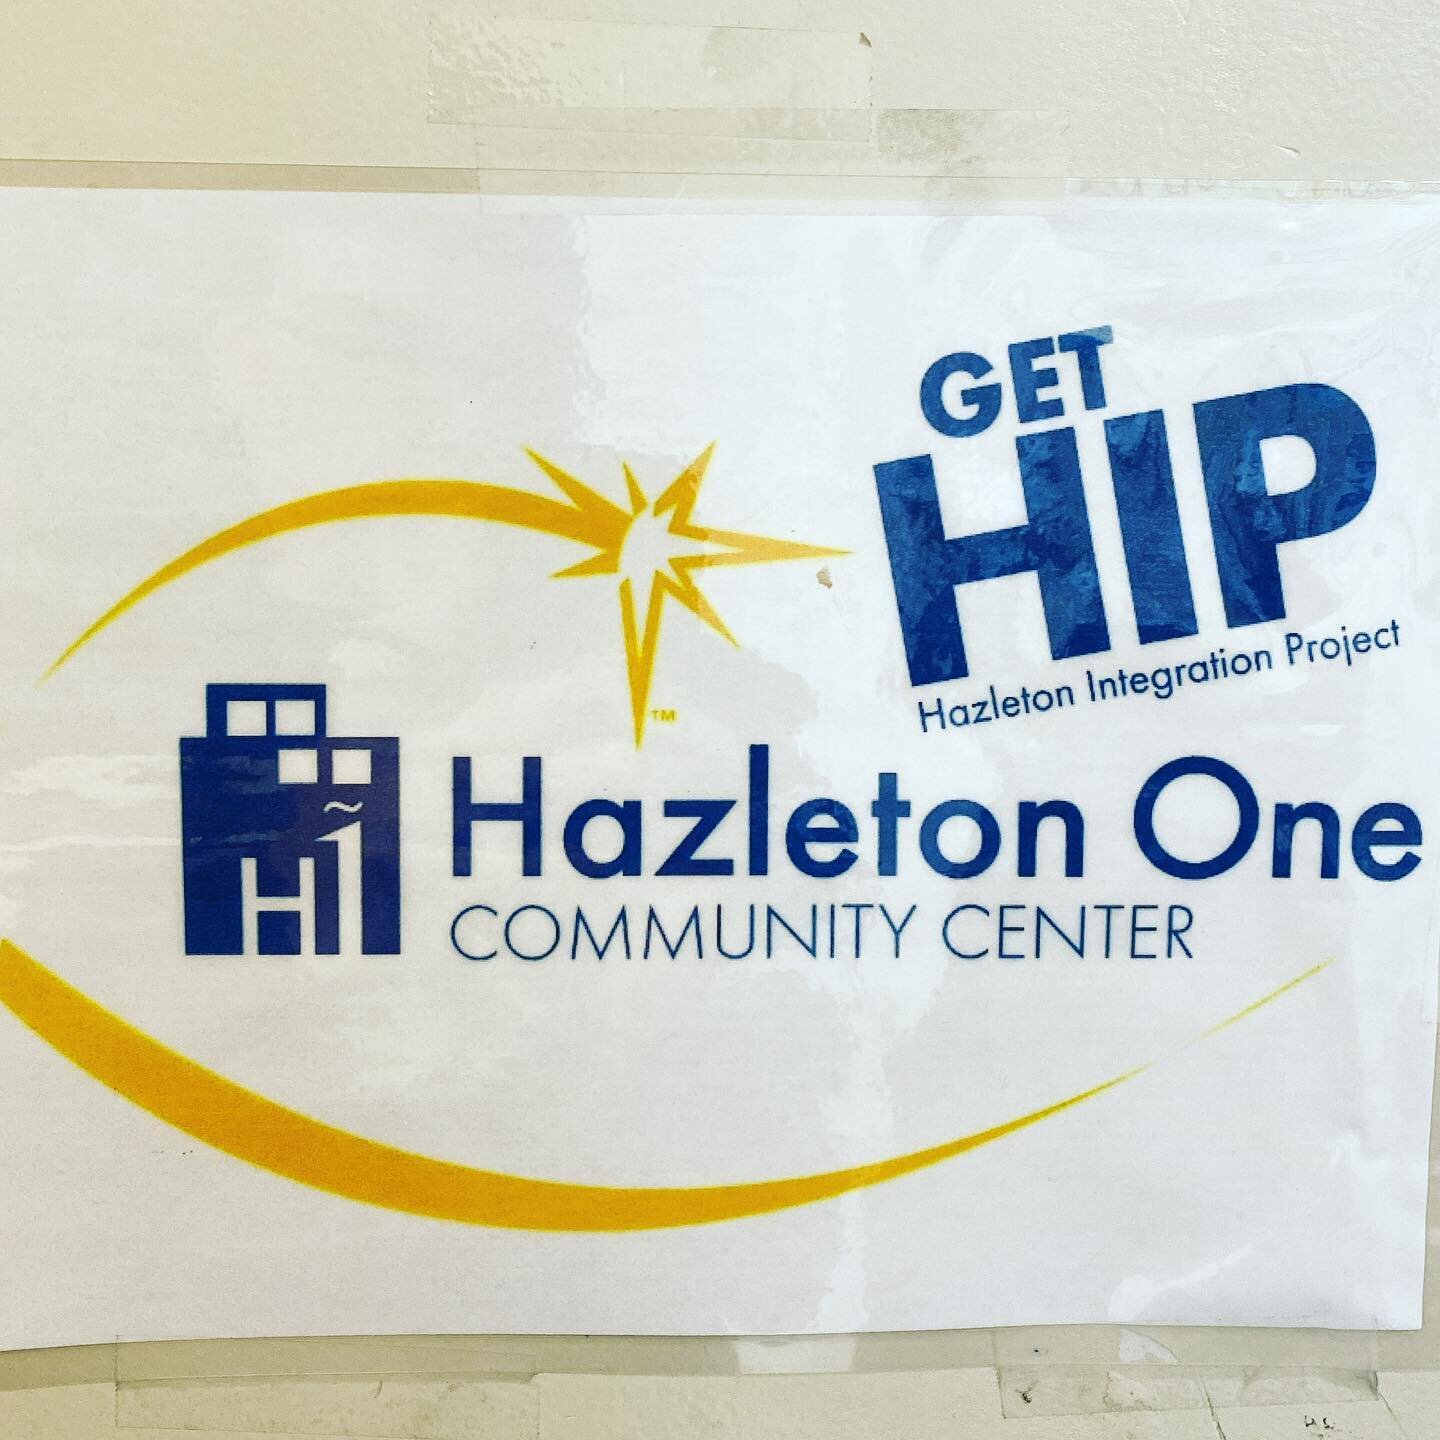 The Hazleton One Community Center, 225 E 4th Street is now closed. All educational and athletic programs, both for children and adults, will be suspended until March 30. If you have any questions please call our office 570-861-8081.

El Centro Comuni